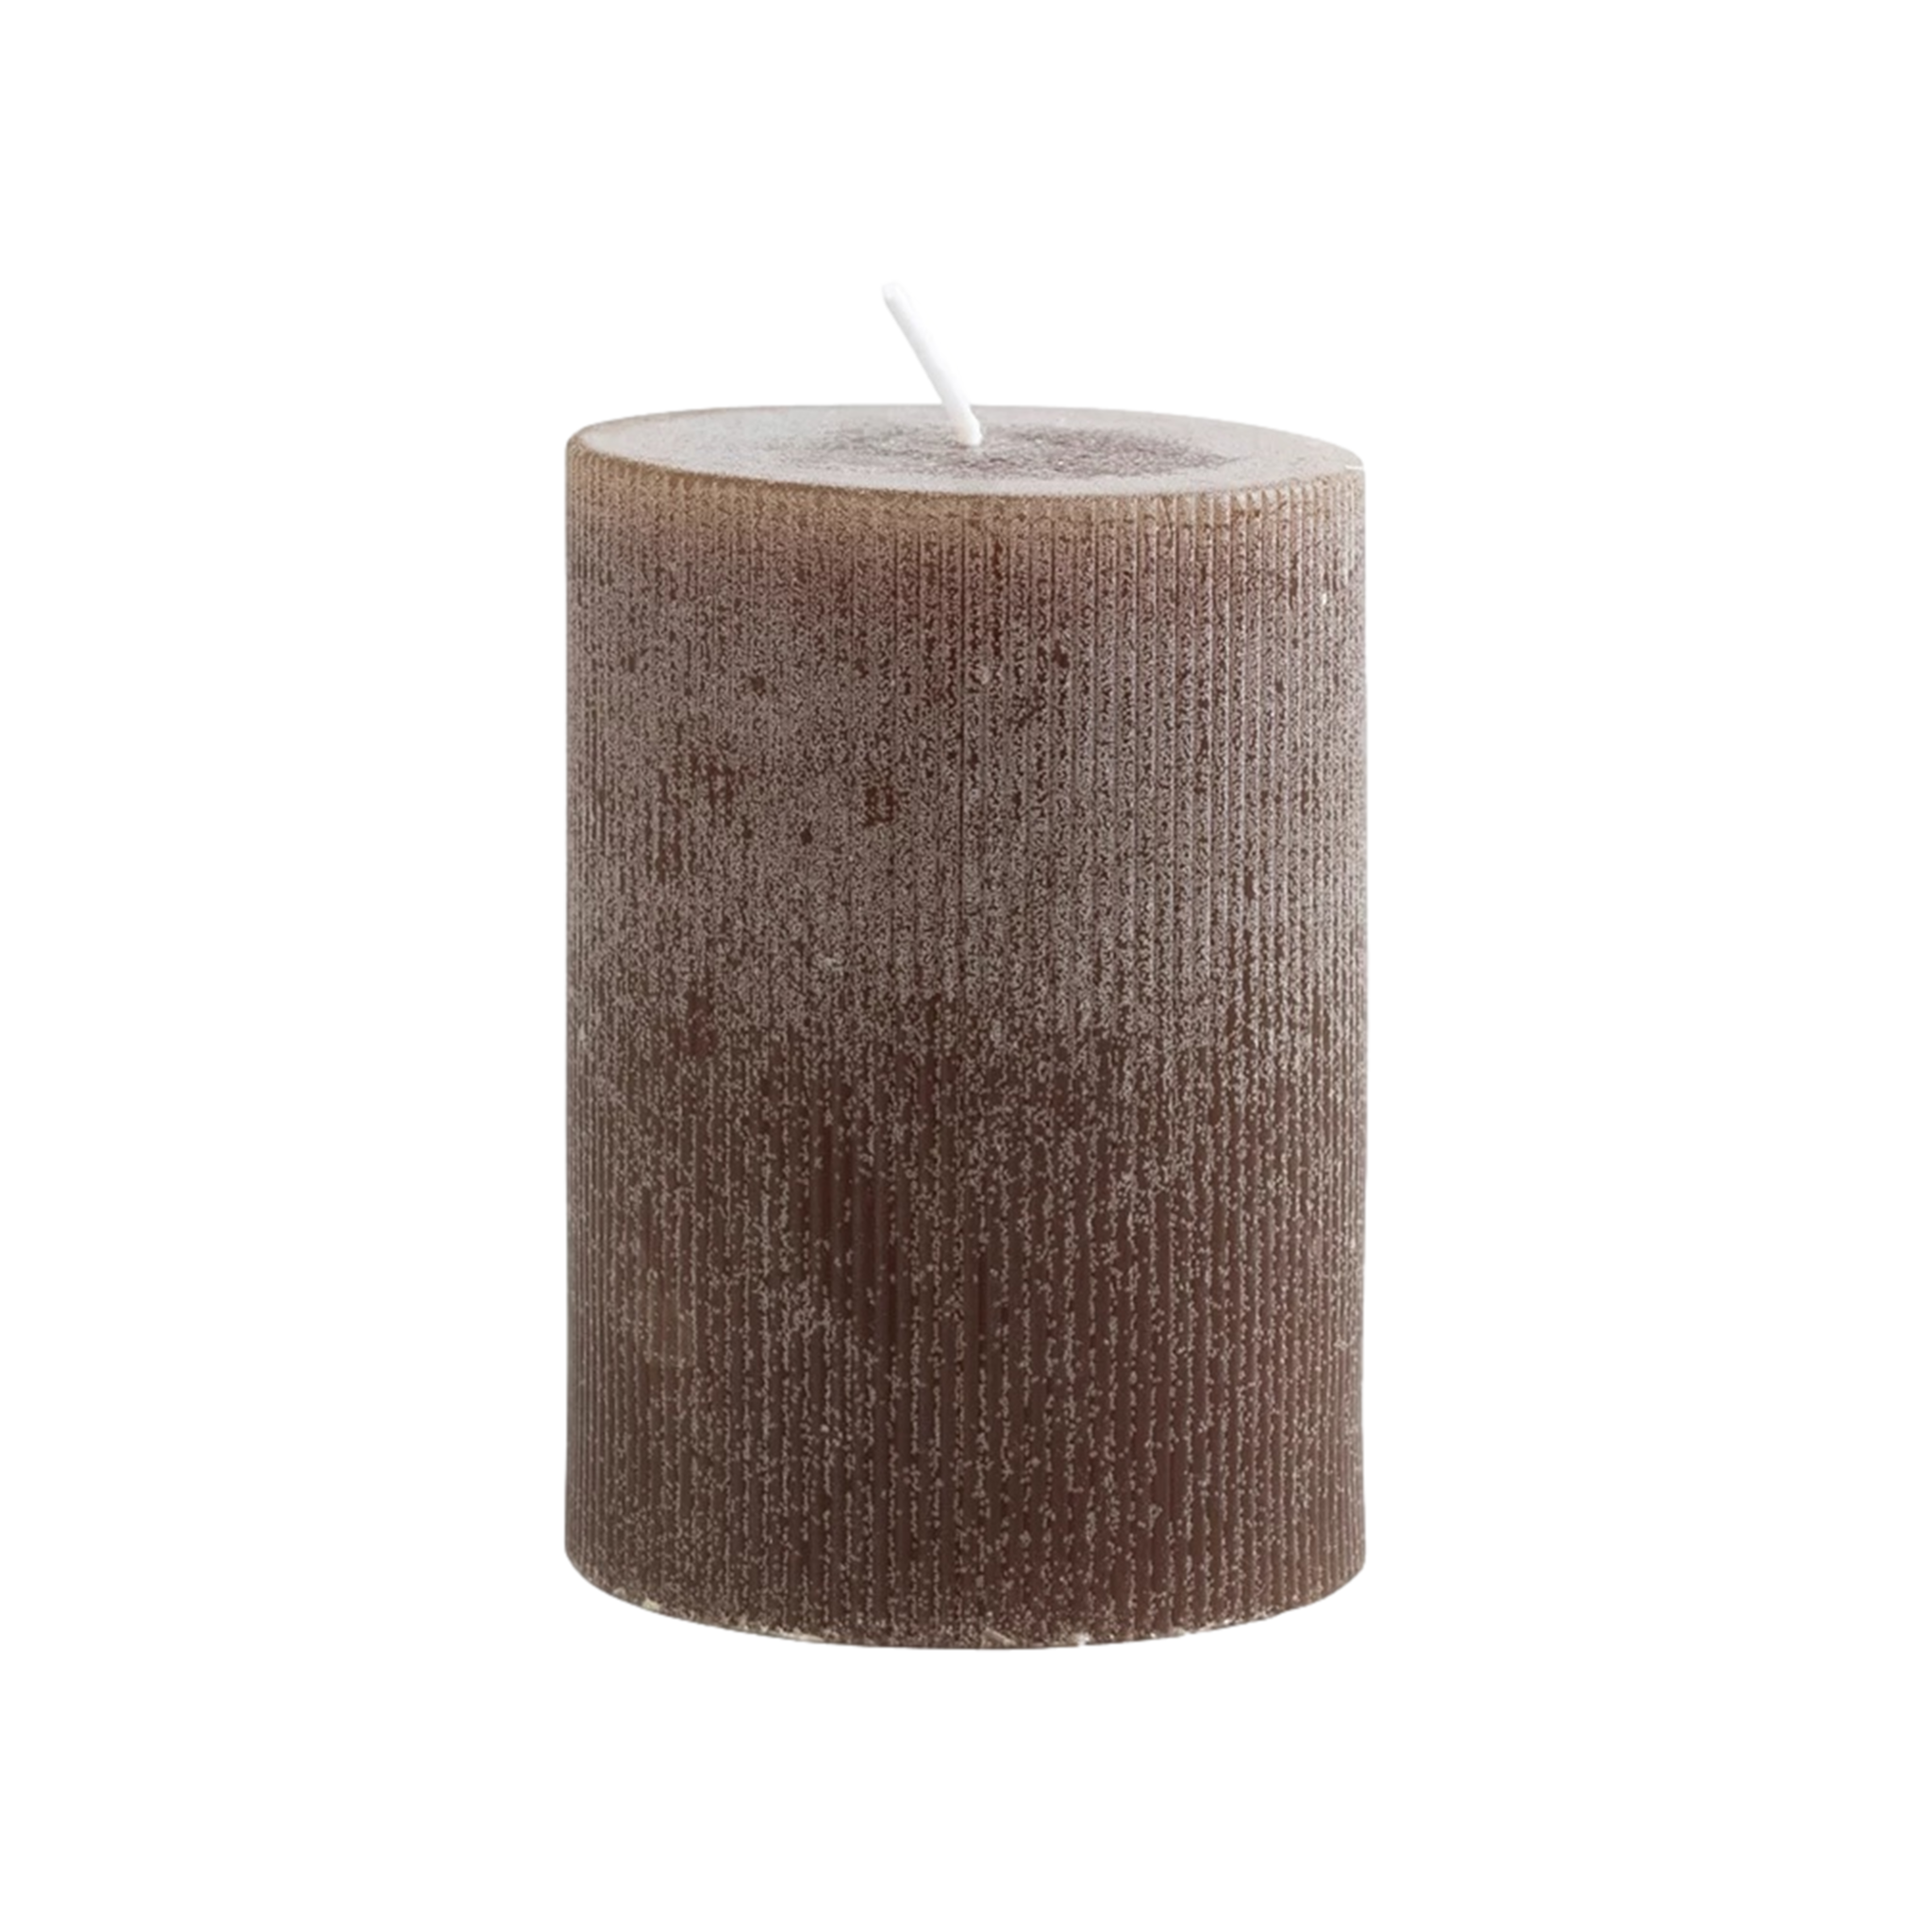 Pleated Pillar Candle in Leather